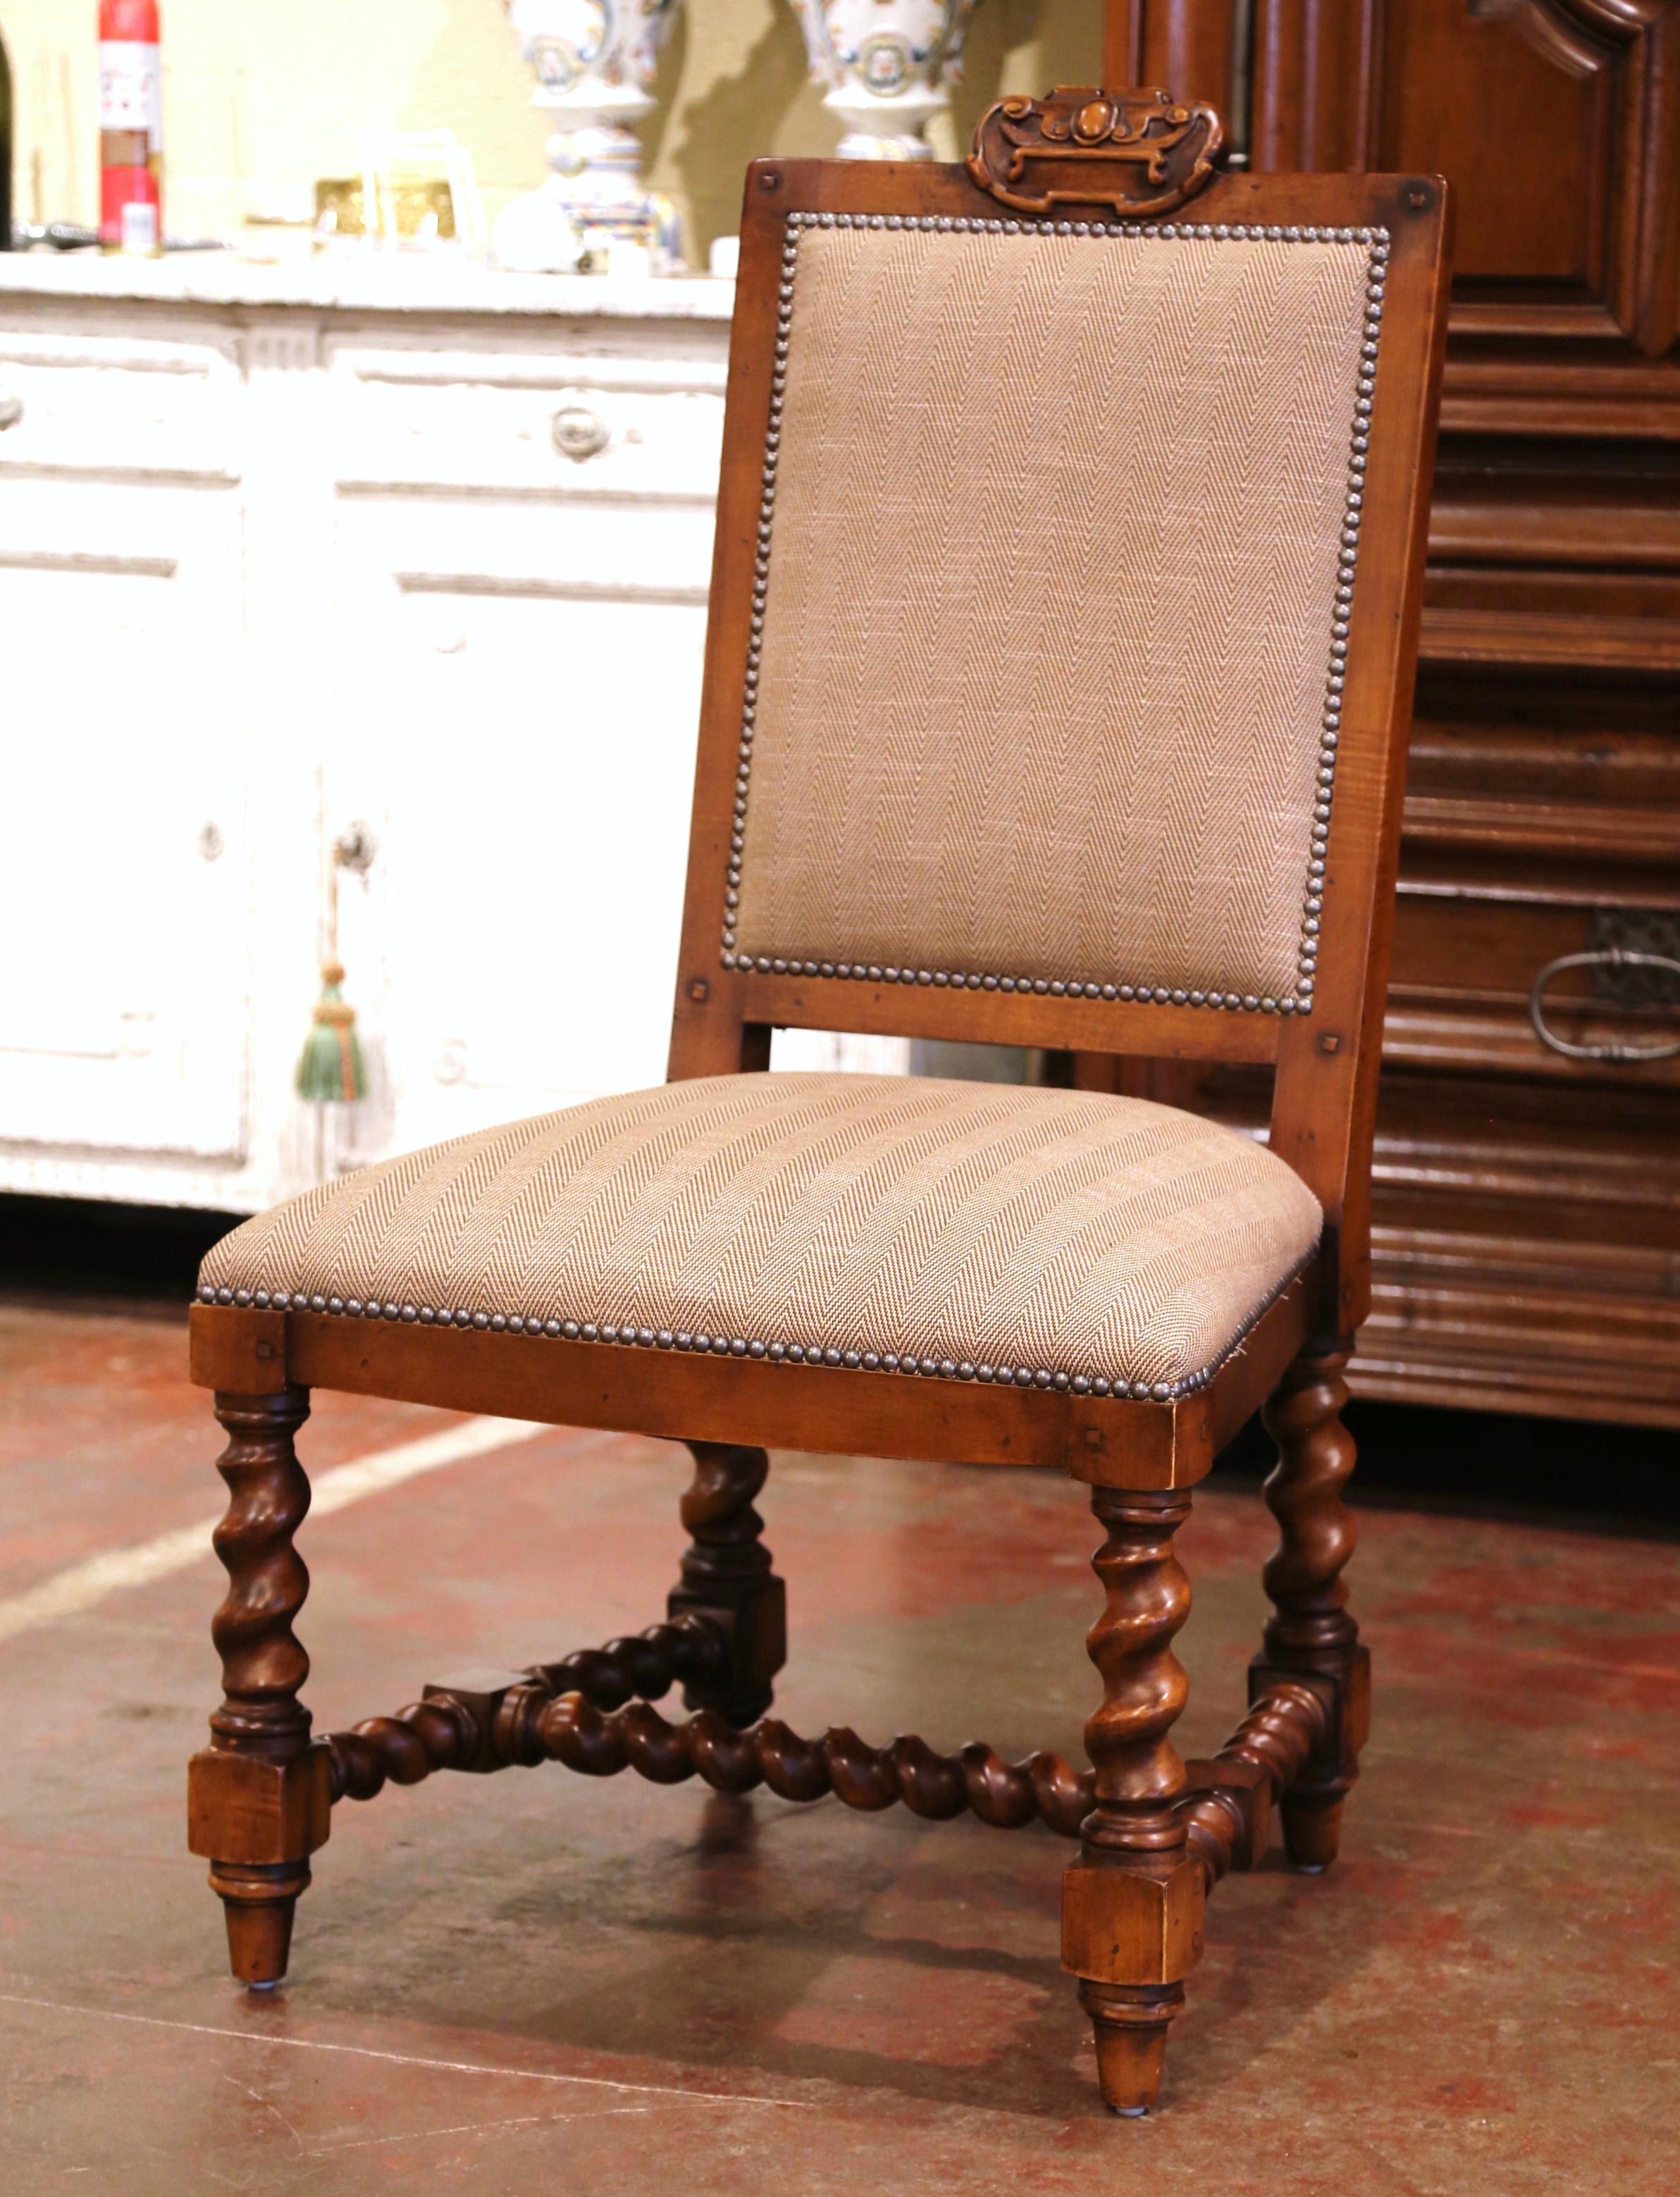 Patinated Suite of Twelve Carved Walnut Chairs from Ralph Lauren with Chenille and Leather